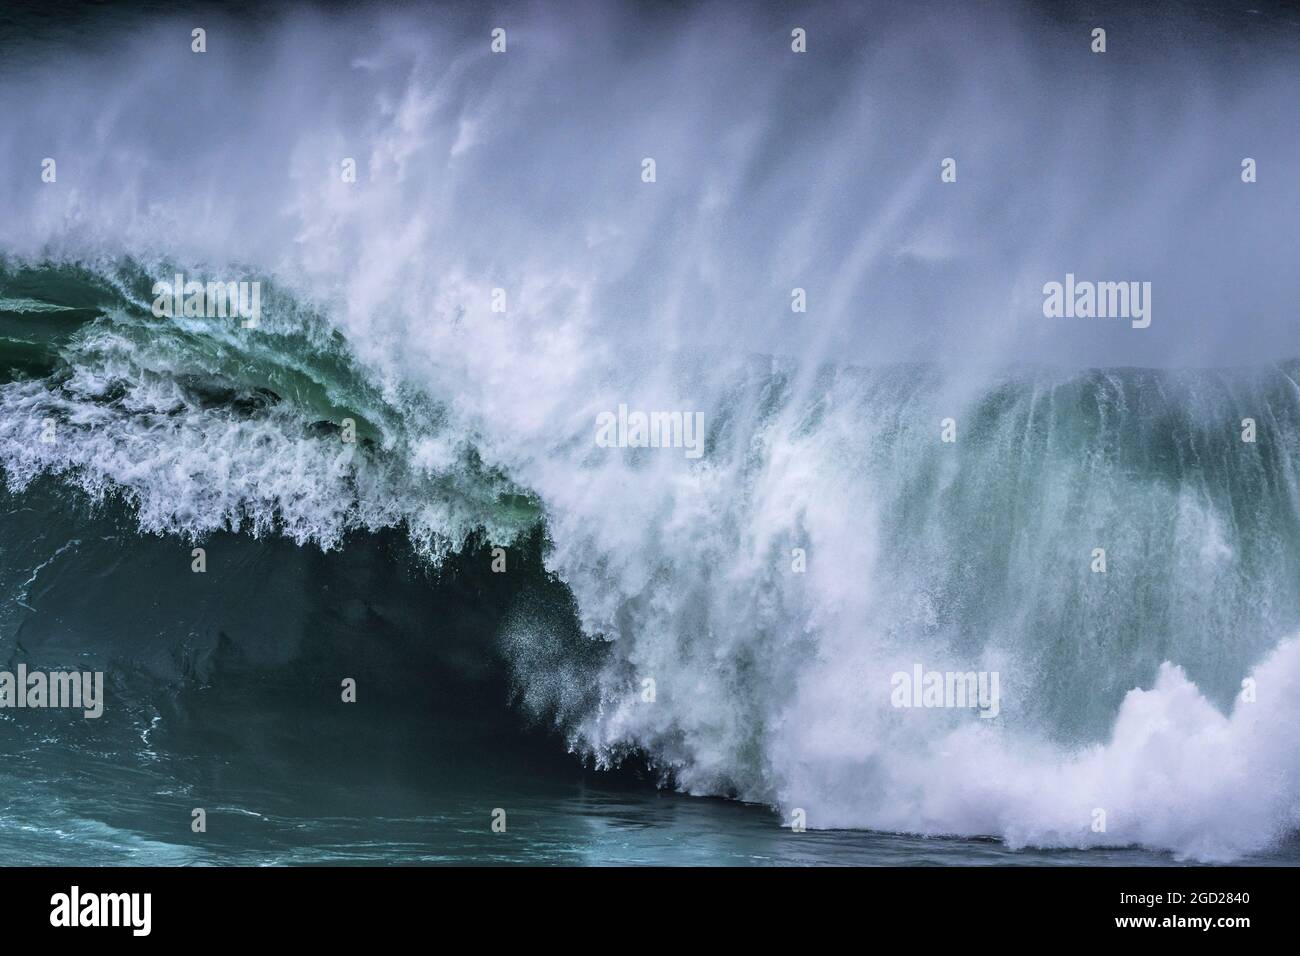 A wild wave breaking on the Cribbar Reef off Towan Head in Newquay in Cornwall. Stock Photo